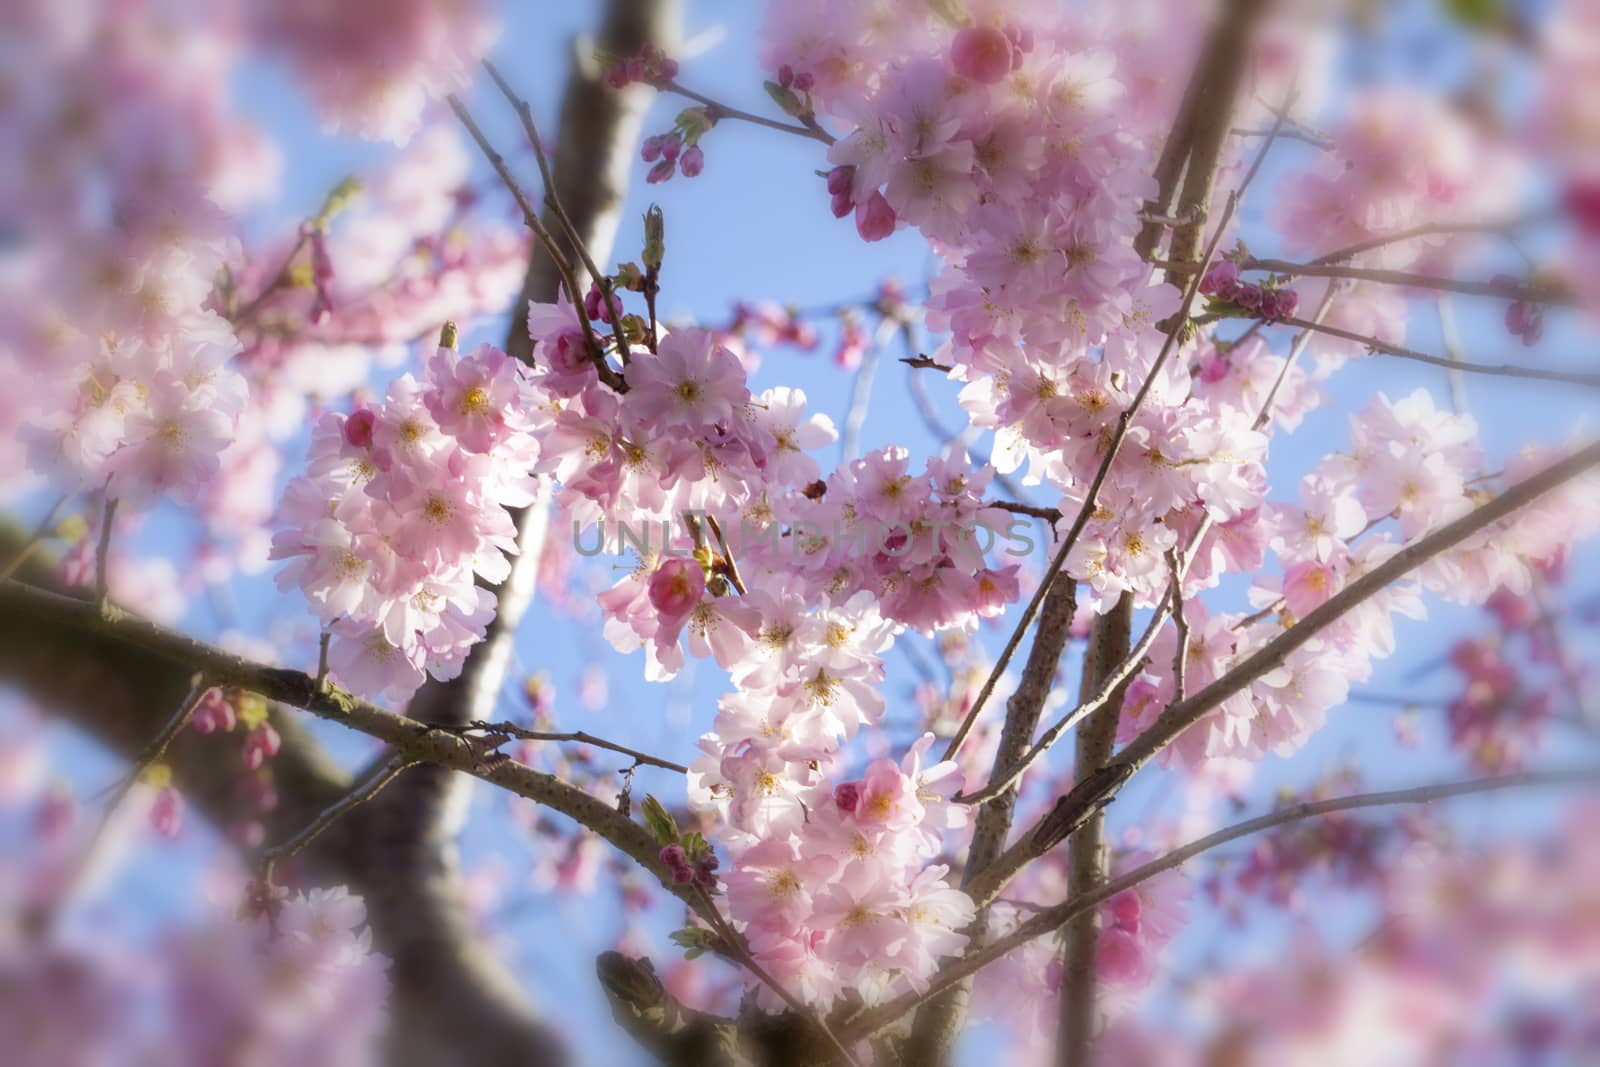 Cherry blossoms over blue sky by Fr@nk